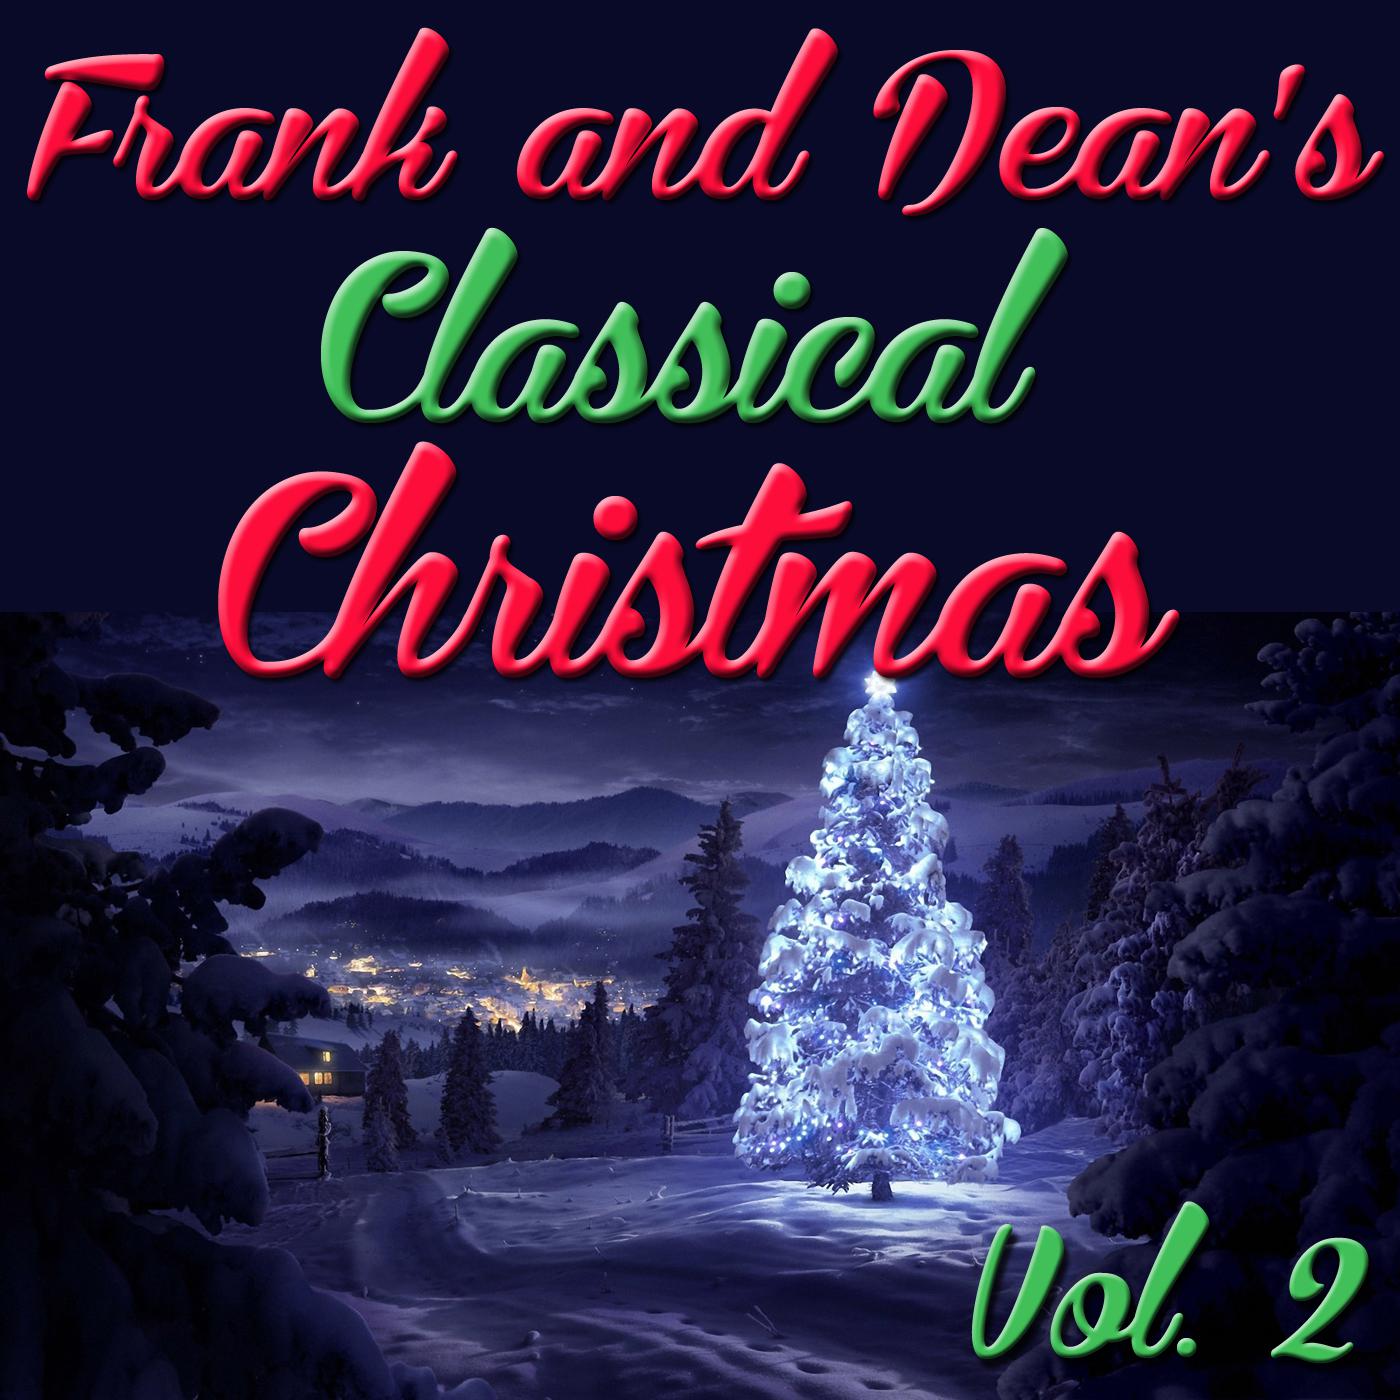 Frank and Dean's Classical Christmas, Vol. 2 (Copy)